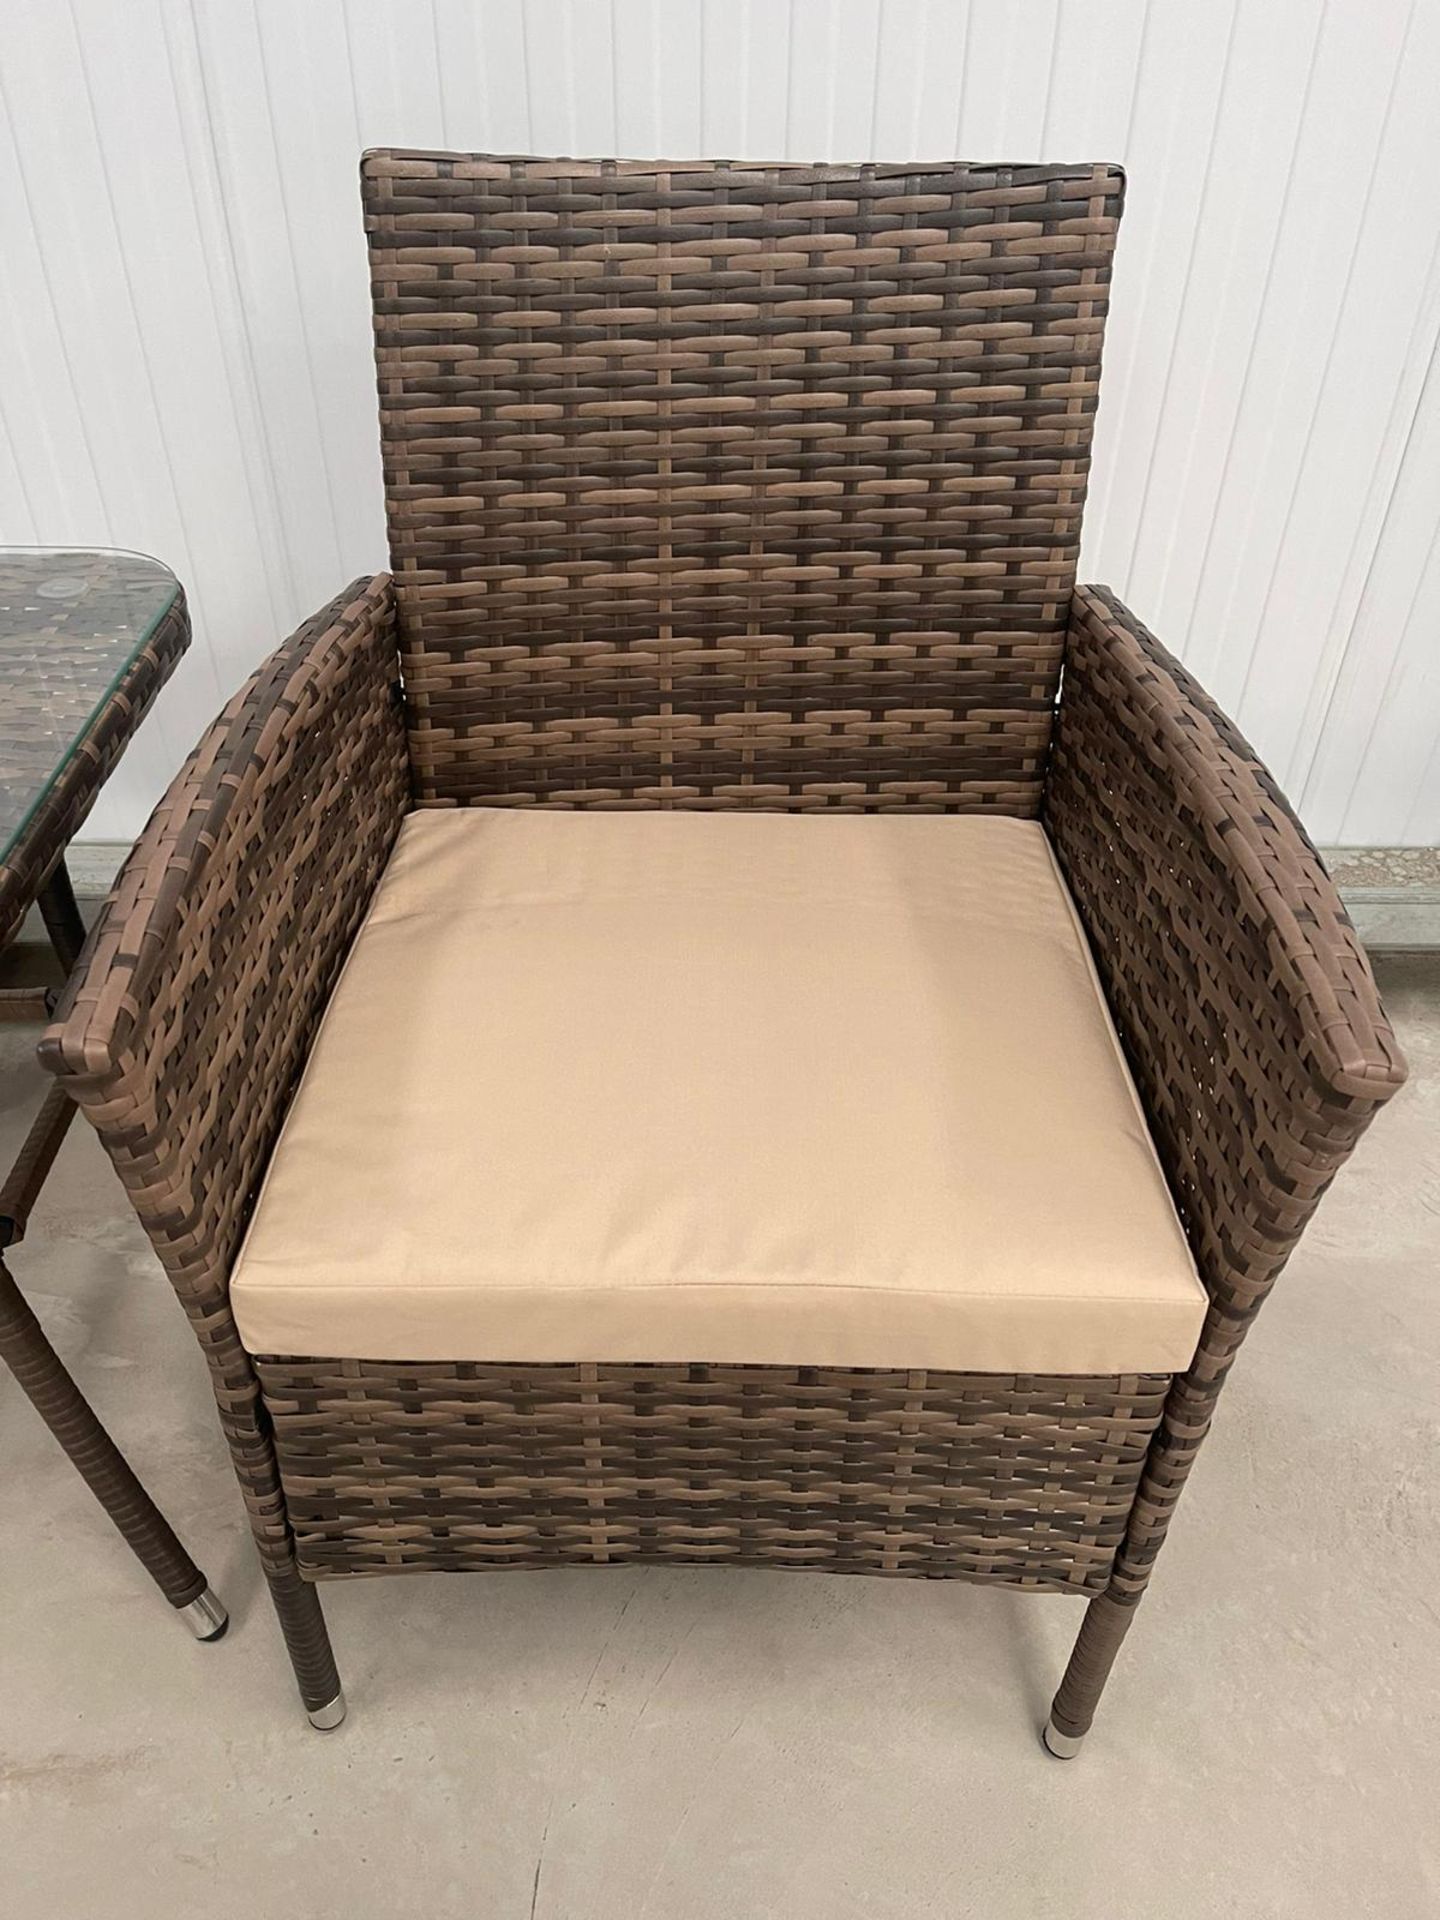 RRP £229 - NEW BROWN BISTRO SET WITH TALL TABLE. TABLE 46 X 46 X 62CM, CHAIR 51 X 60 X 83XM - Image 4 of 4